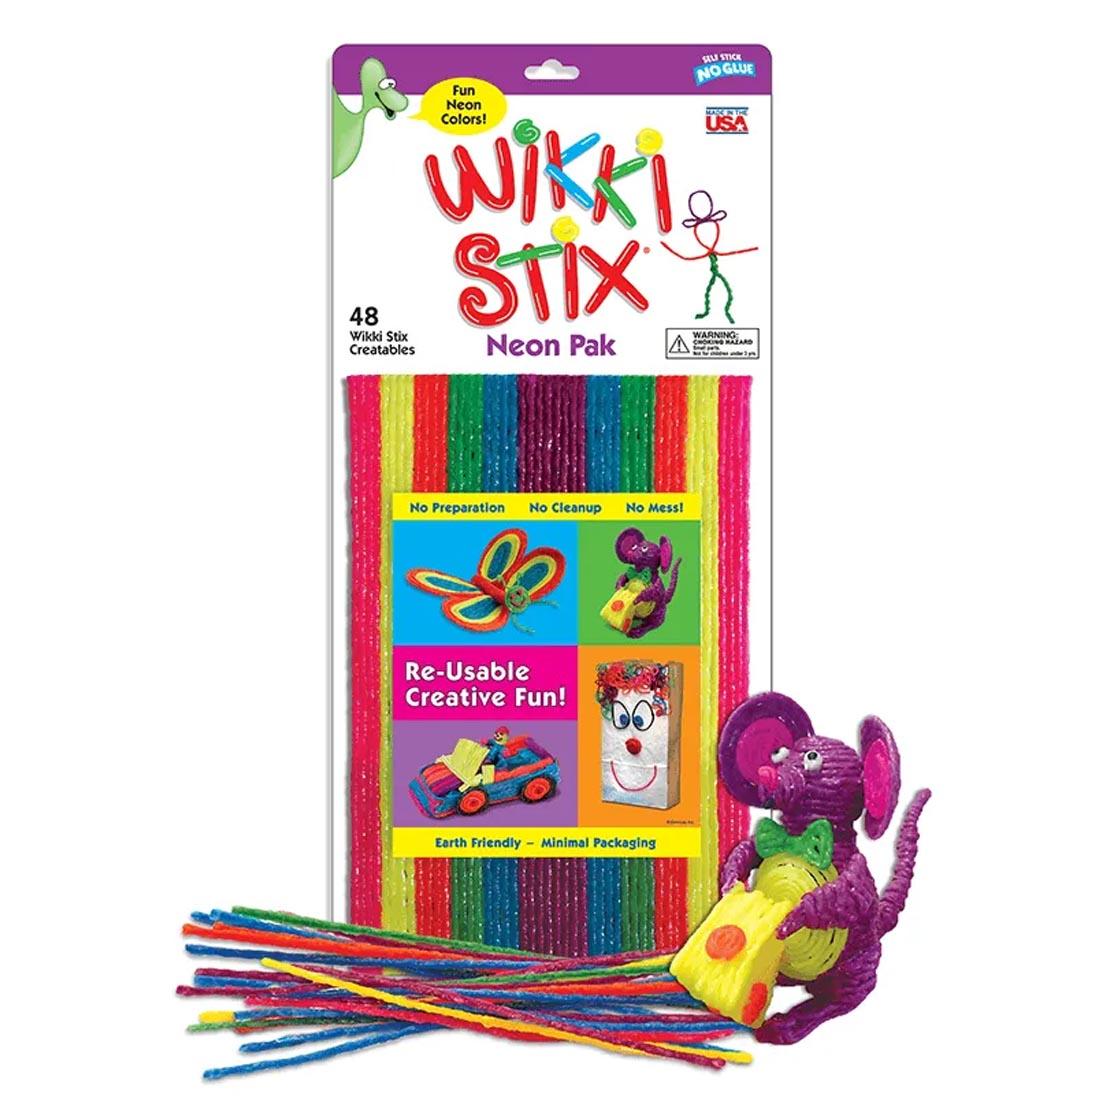 wax-coated yarn pieces in assorted neon colors, with mouse figurine created from pieces